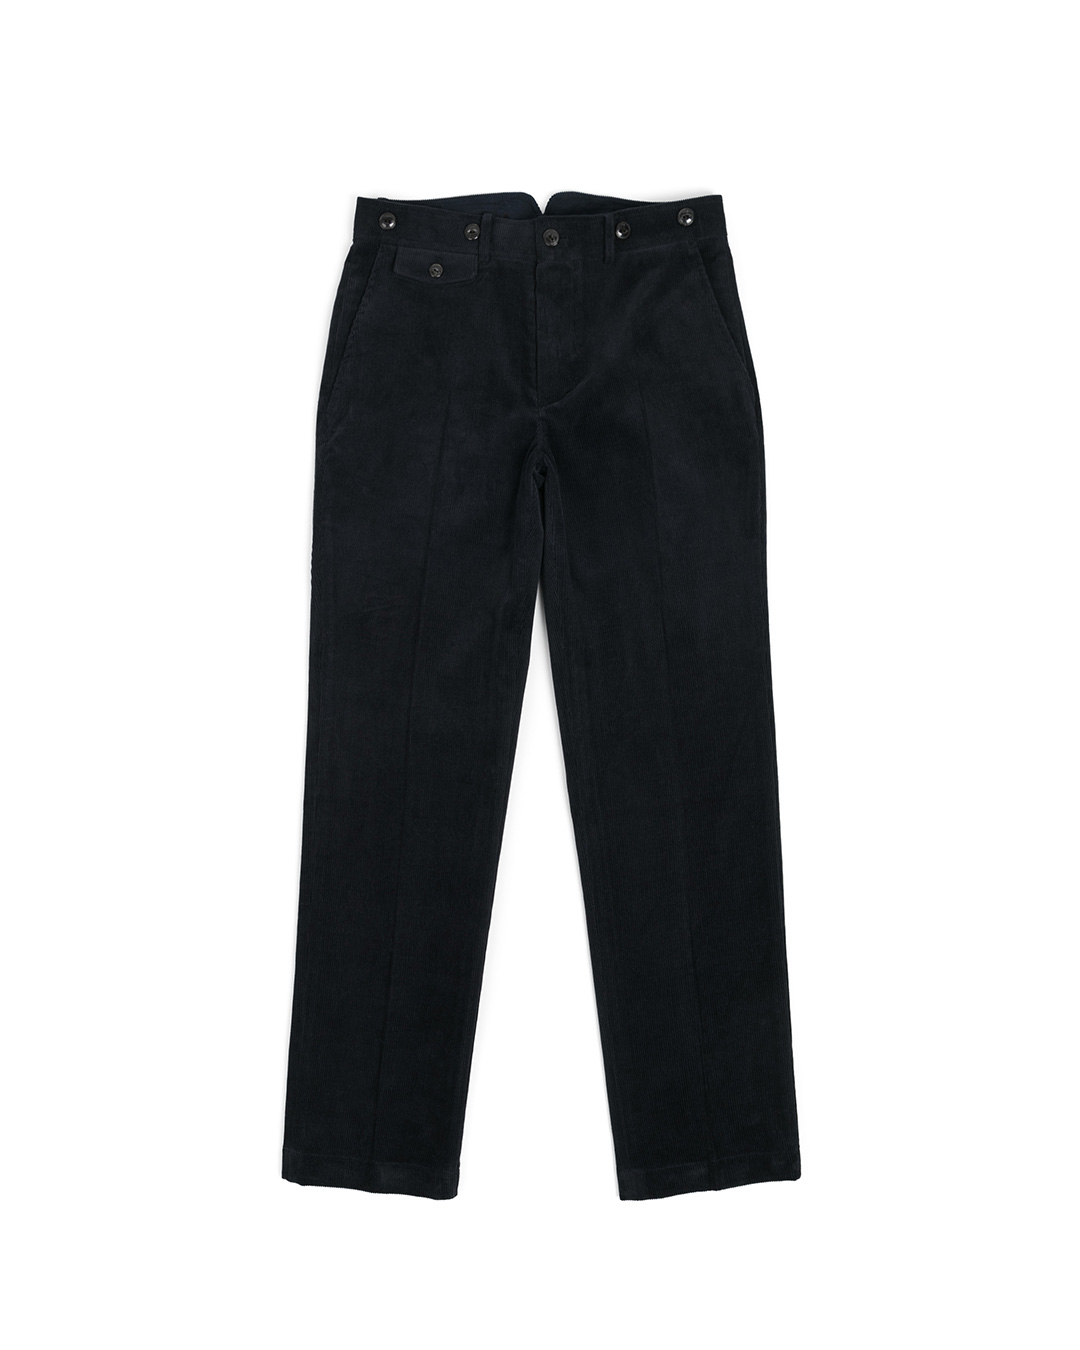 02 BUCKLE-BACK WORK TROUSERS (navy)